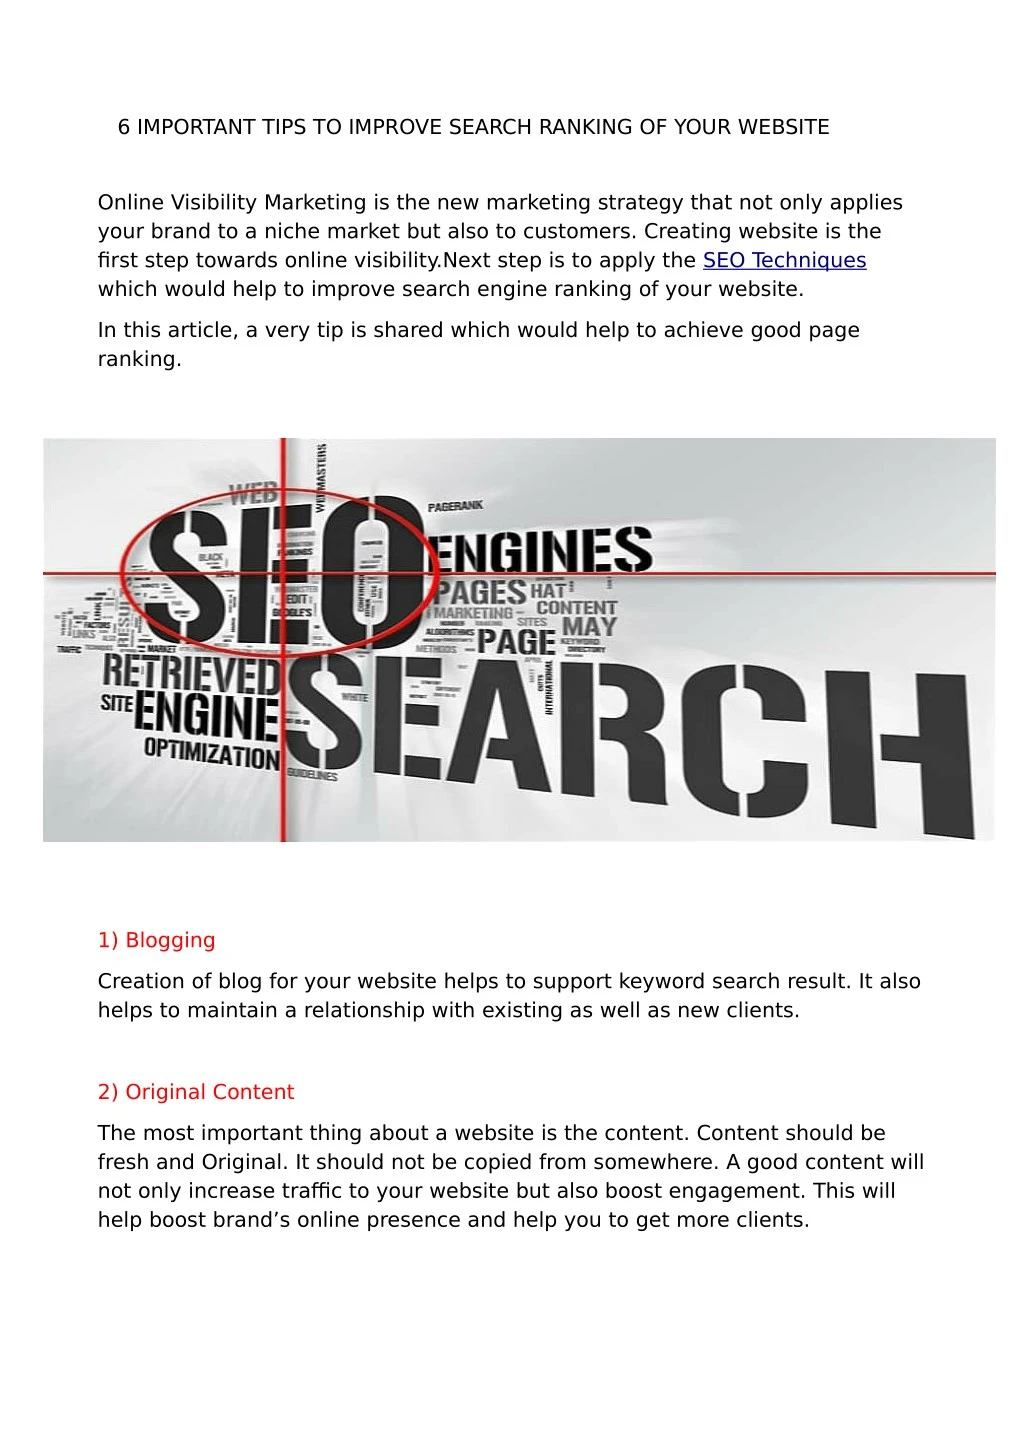 6 important tips to improve search ranking